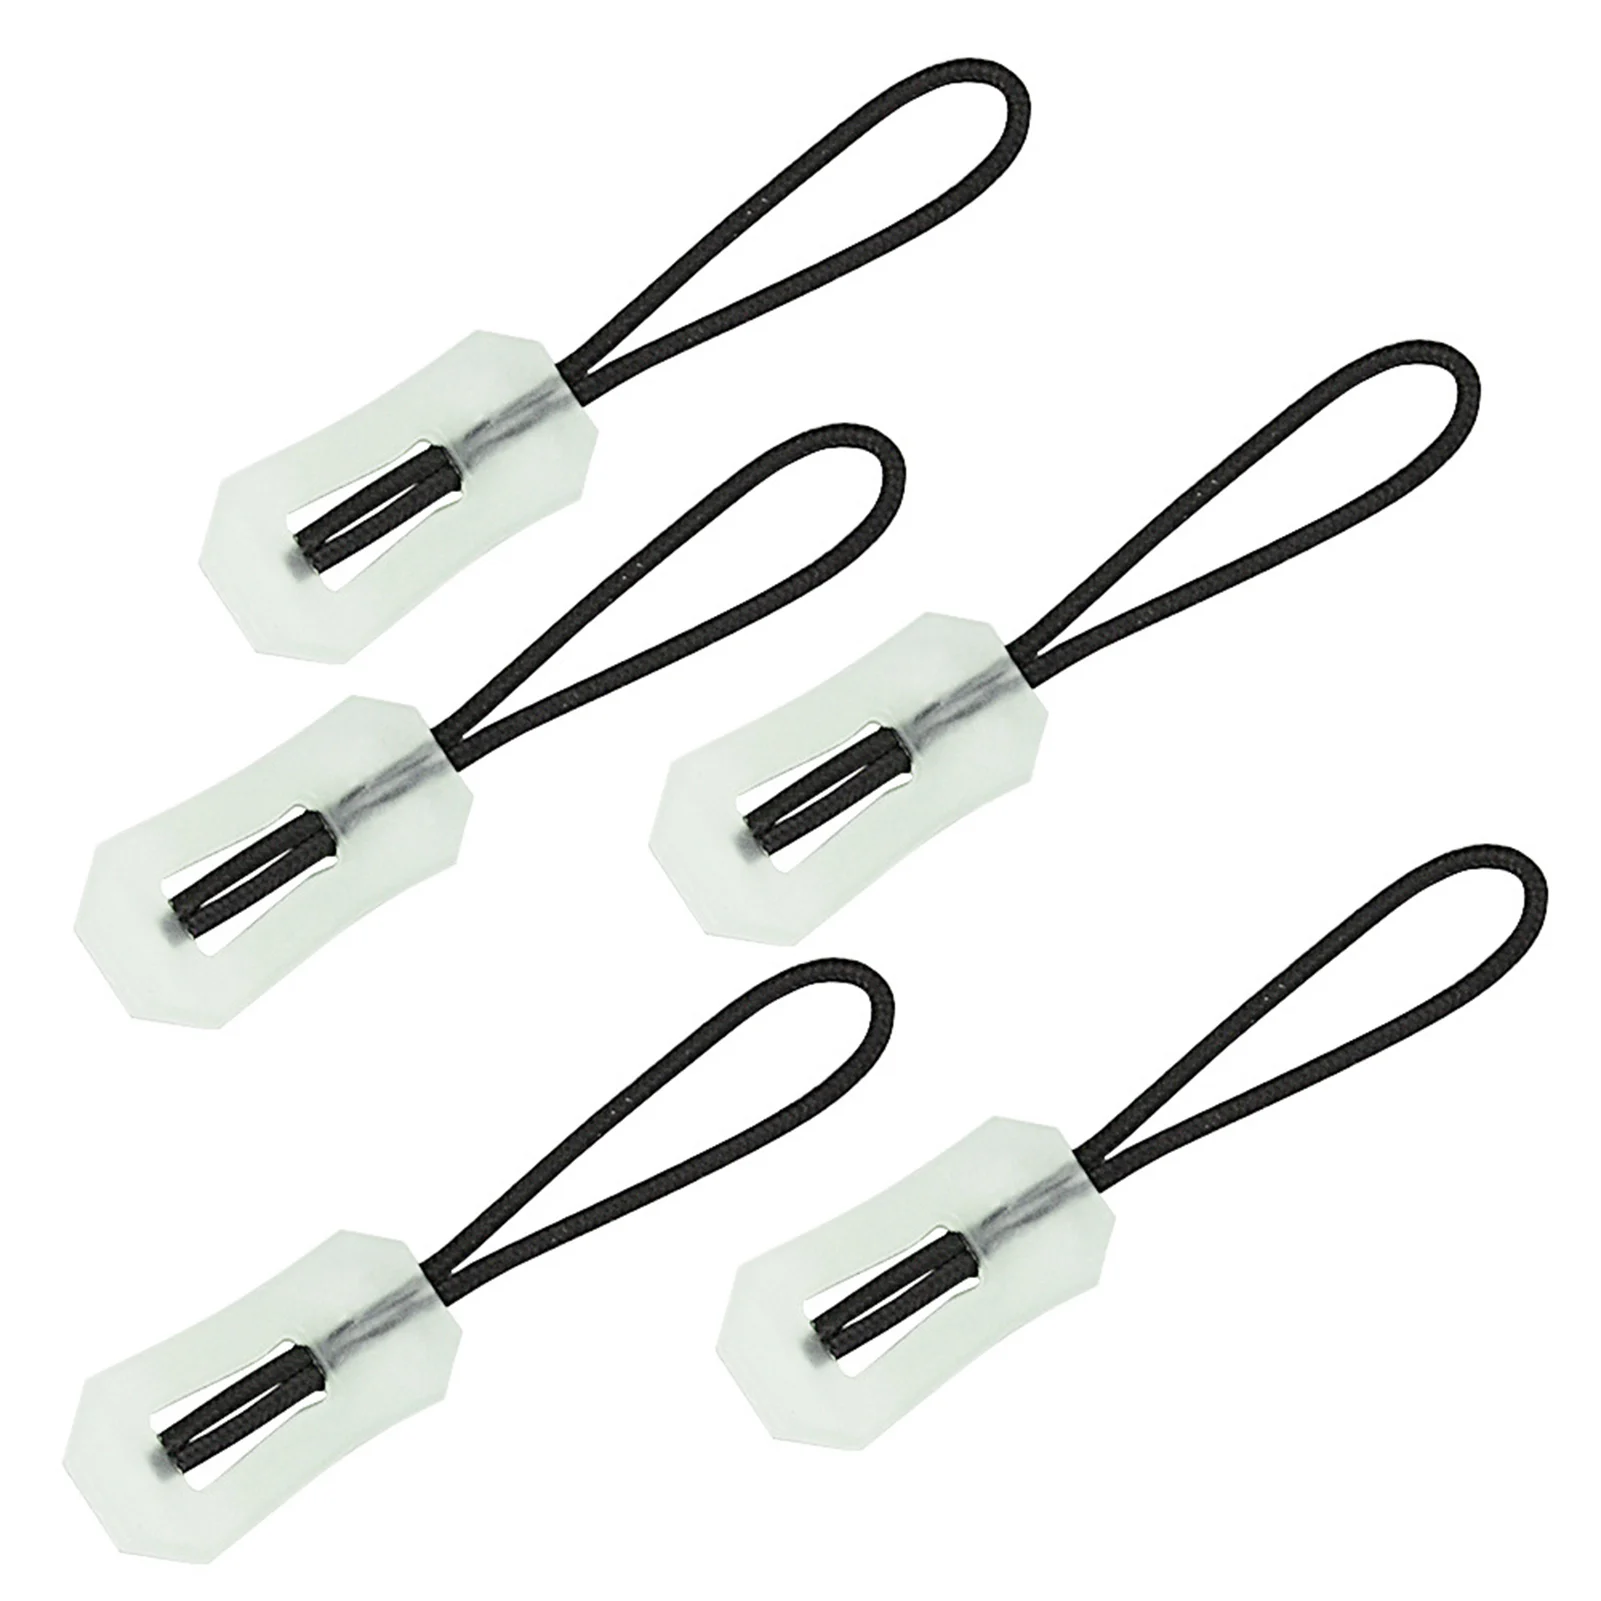 For Backpack 5 Pcs / Pack Reflective Zipper Pull Ideal Kit M